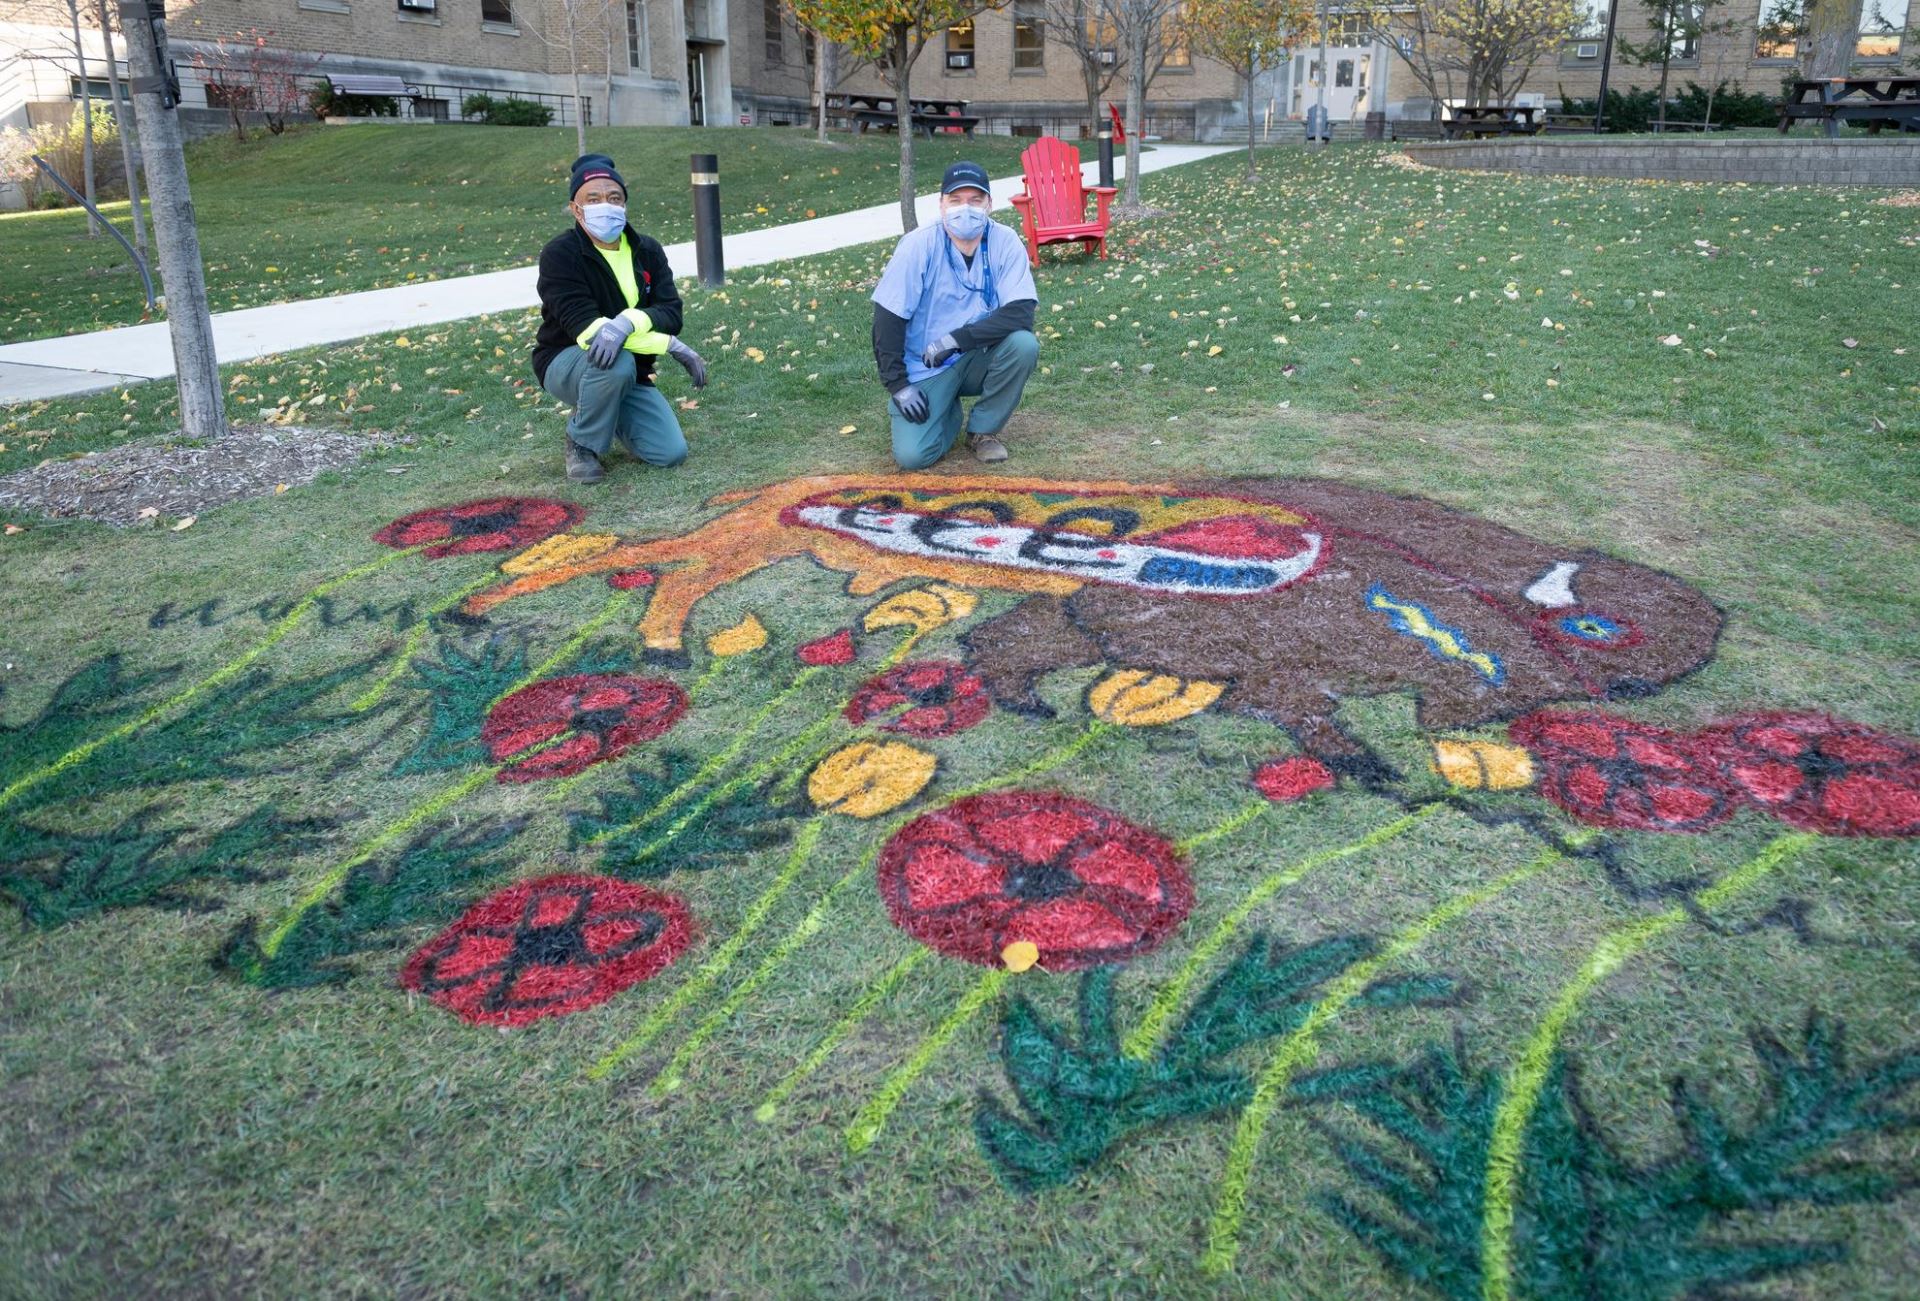 reproduced Philip Cote’s artwork on Sunnybrook grounds